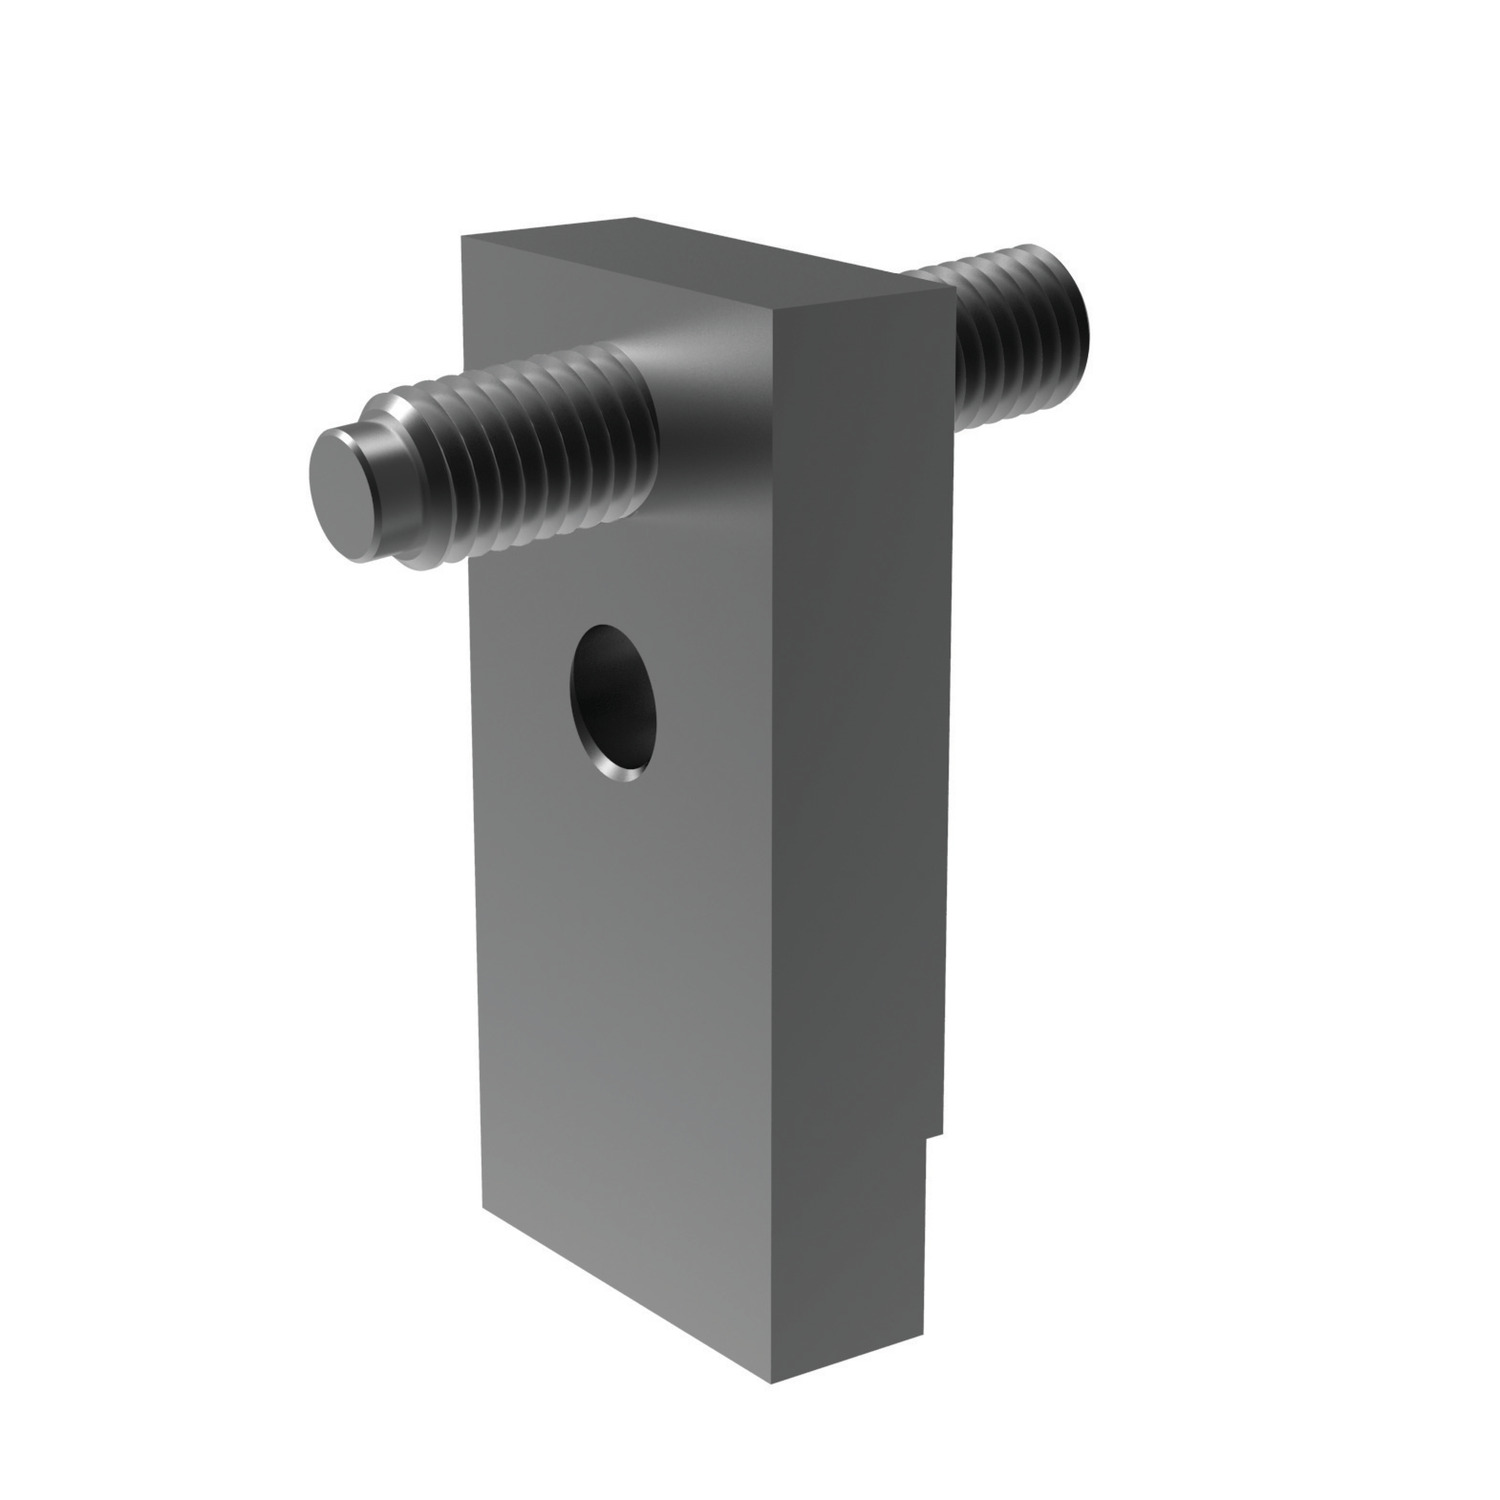 Product 17420, Heavy Duty Side Stop adjustable / 